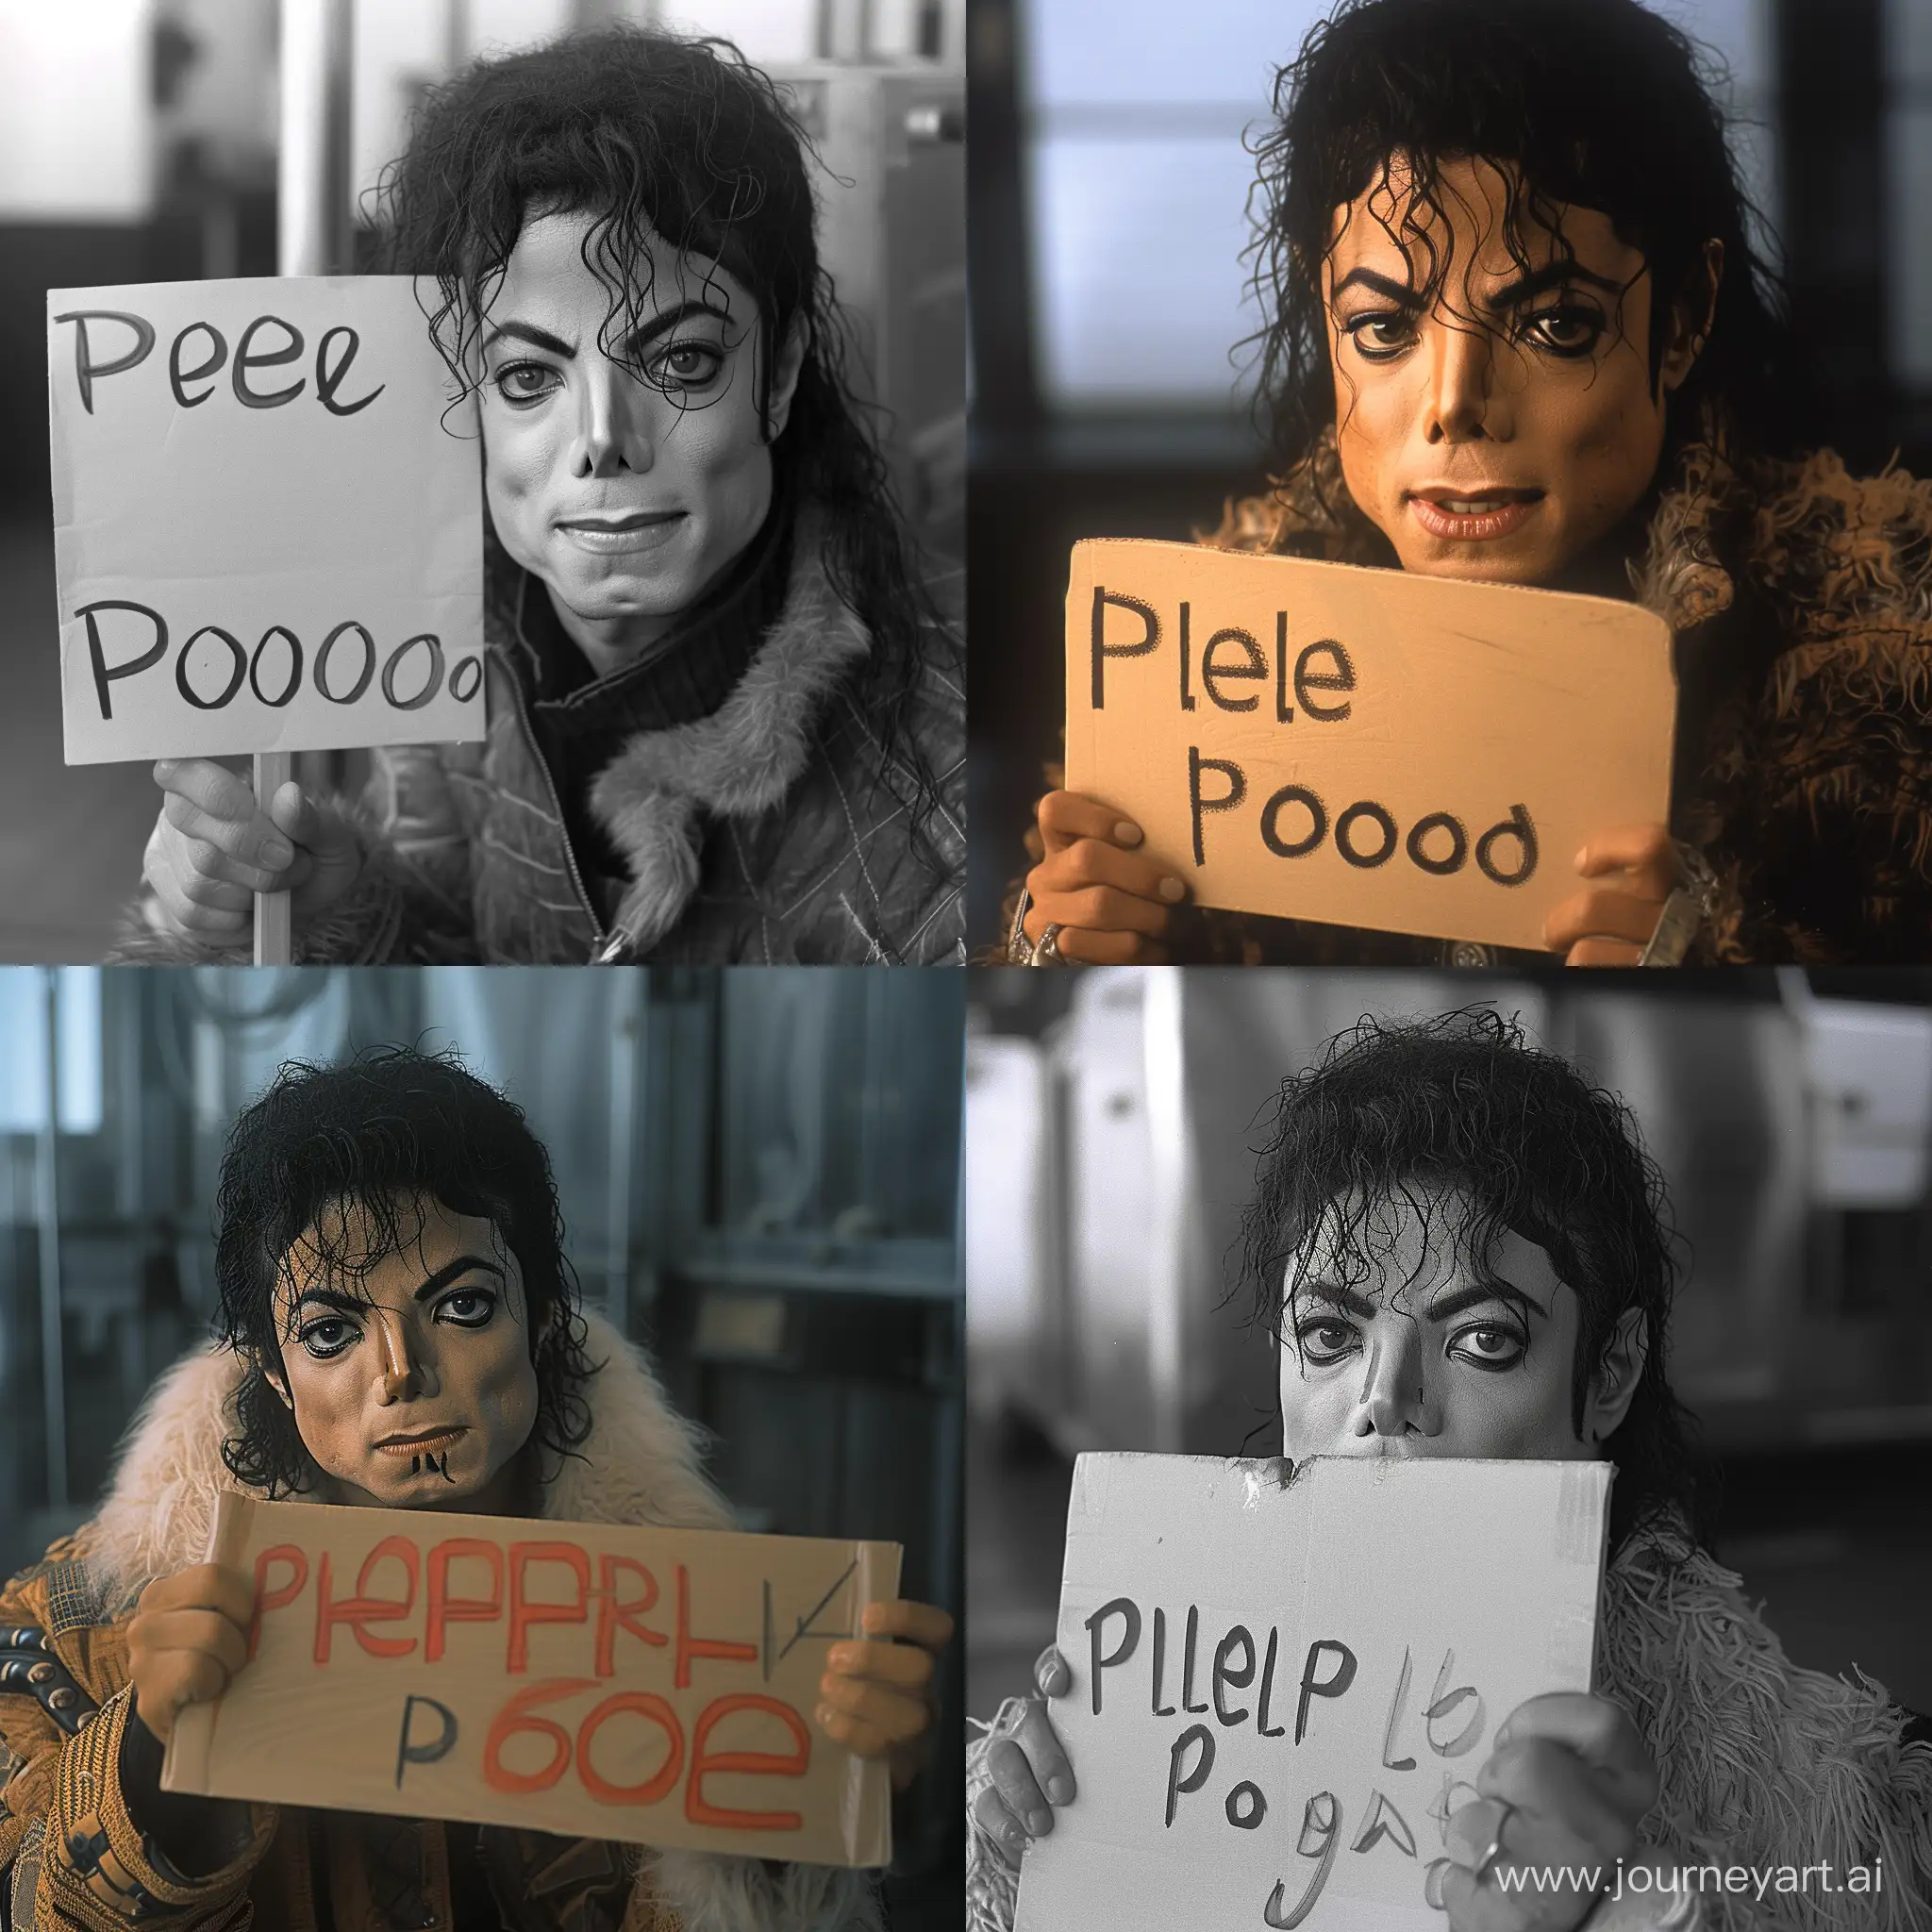 Michael Jackson  holding a sign that says "Please Pookie"